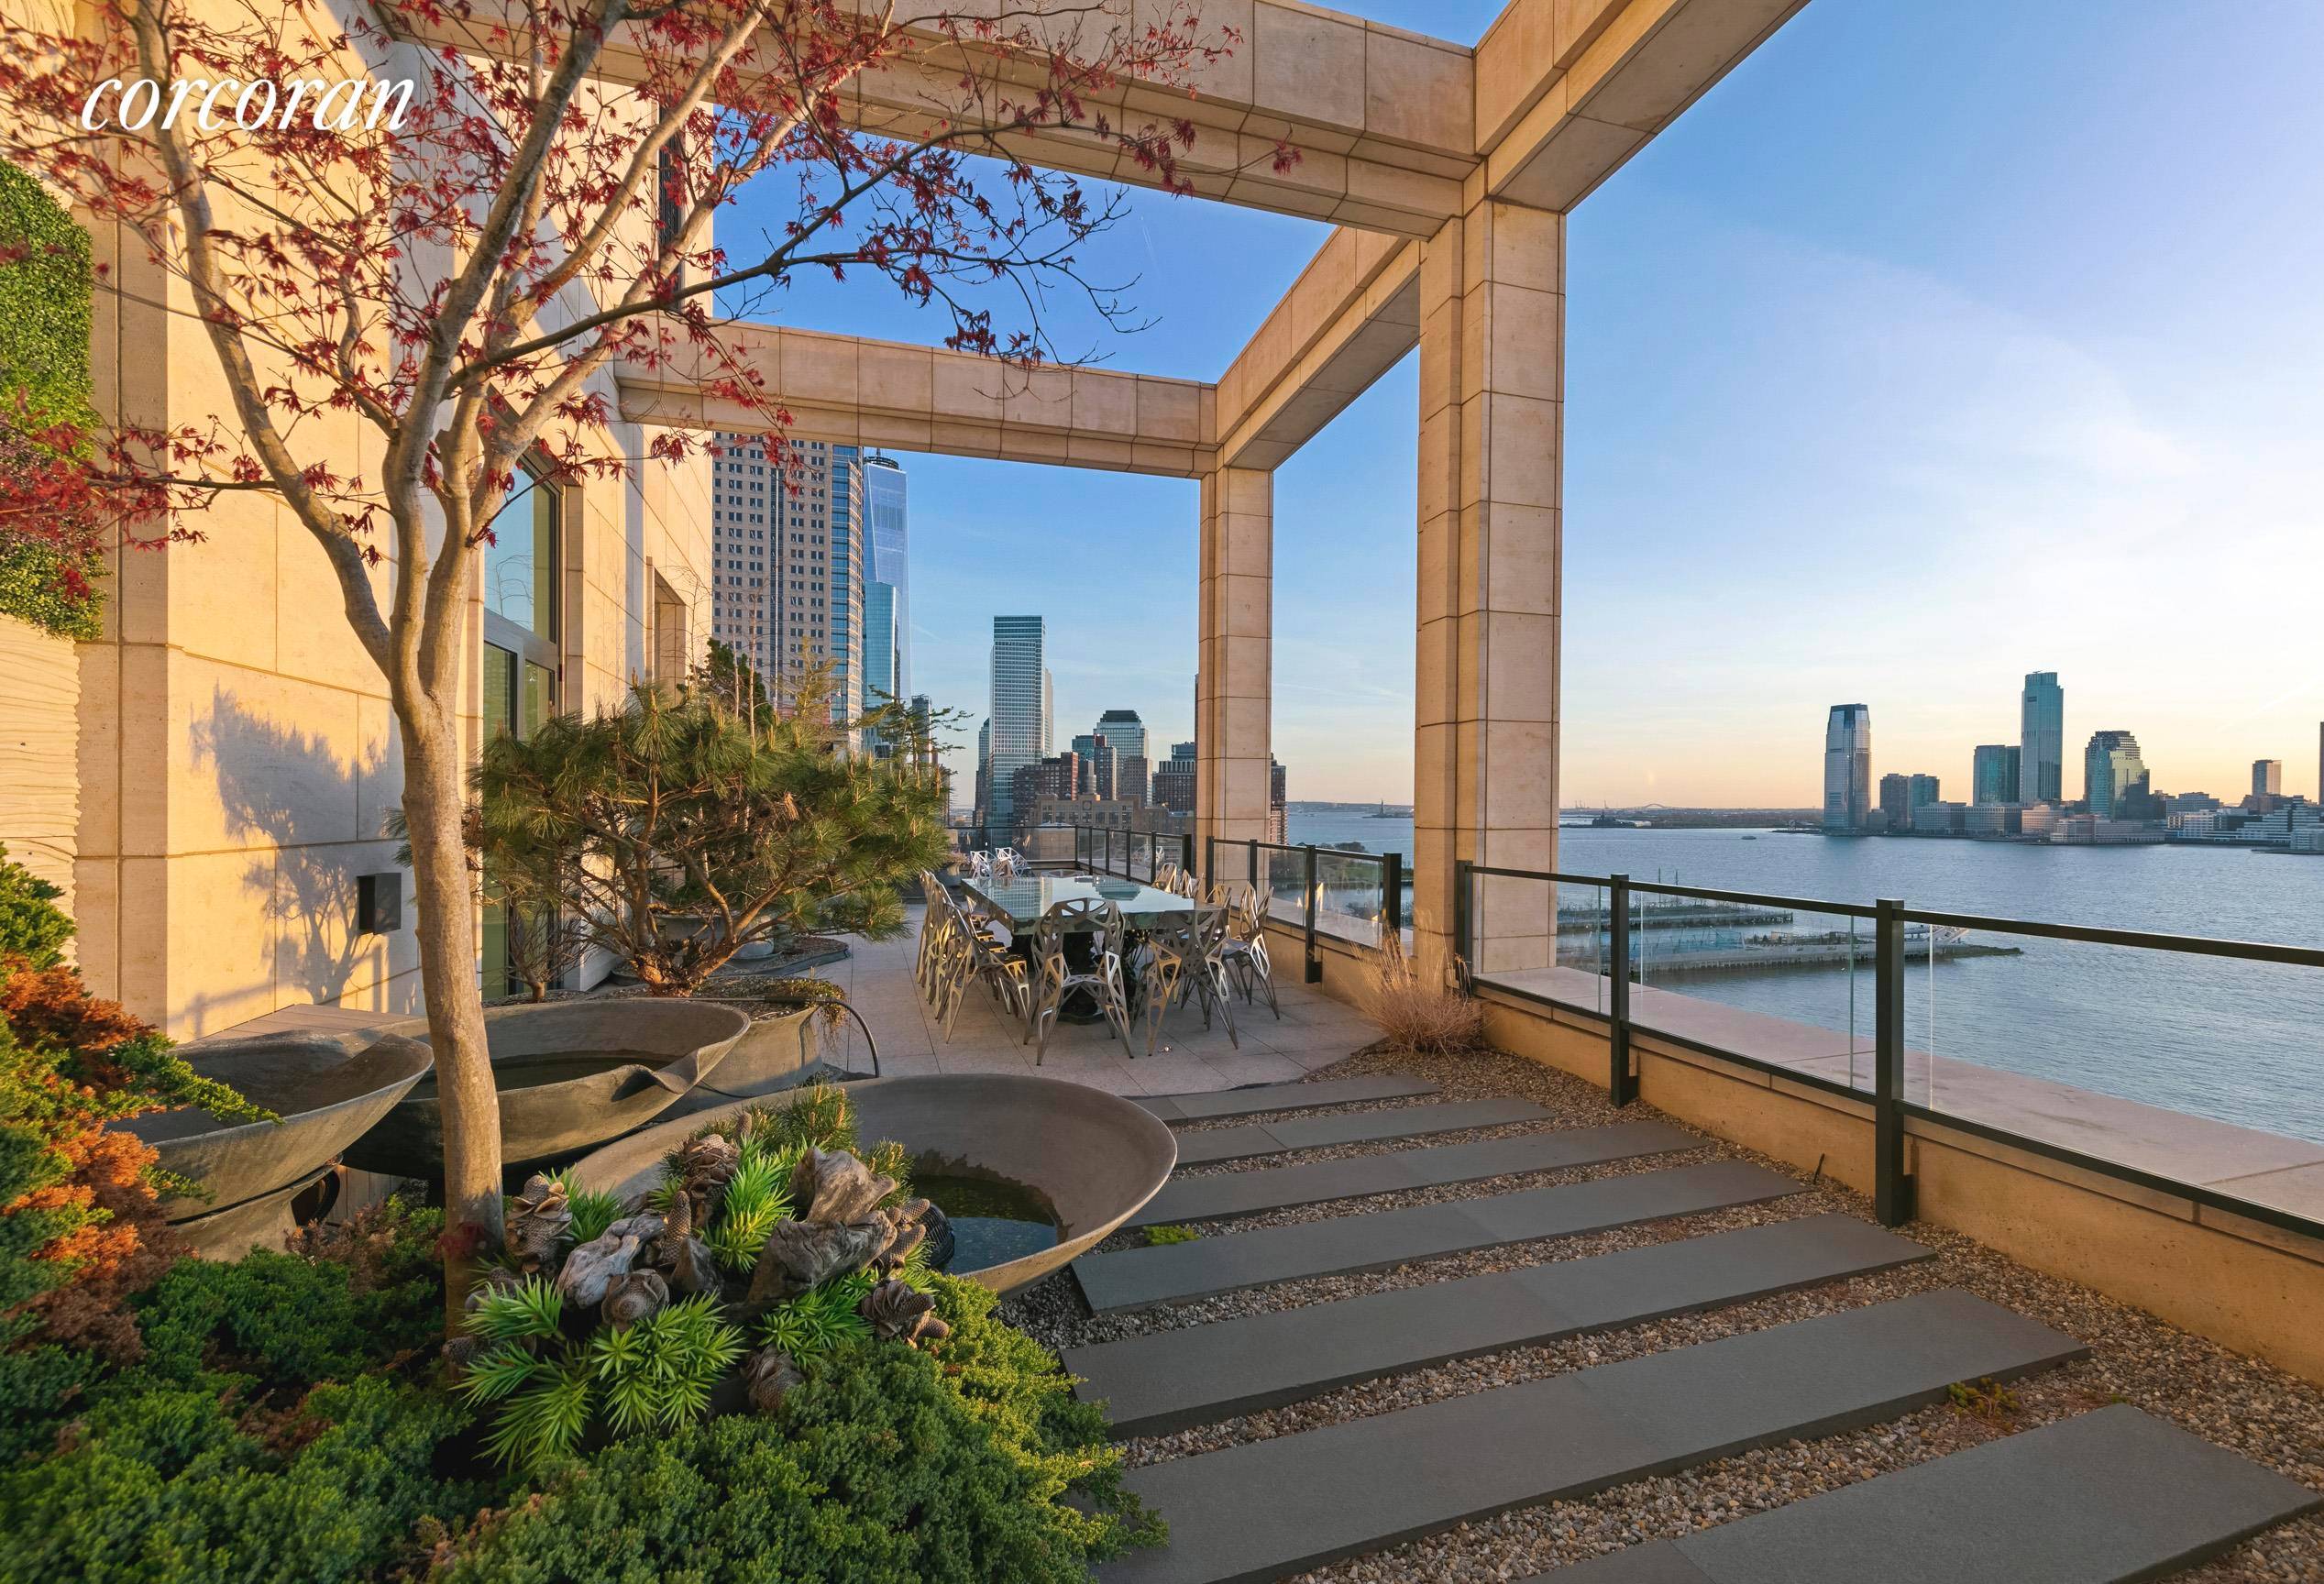 The Crown Jewel of Tribeca, Penthouse South, located atop Robert AM Stern's masterpiece, 70 Vestry, is a magnificent triplex villa on Tribeca's 'Gold Coast' with 360 degree views and breathtaking ...